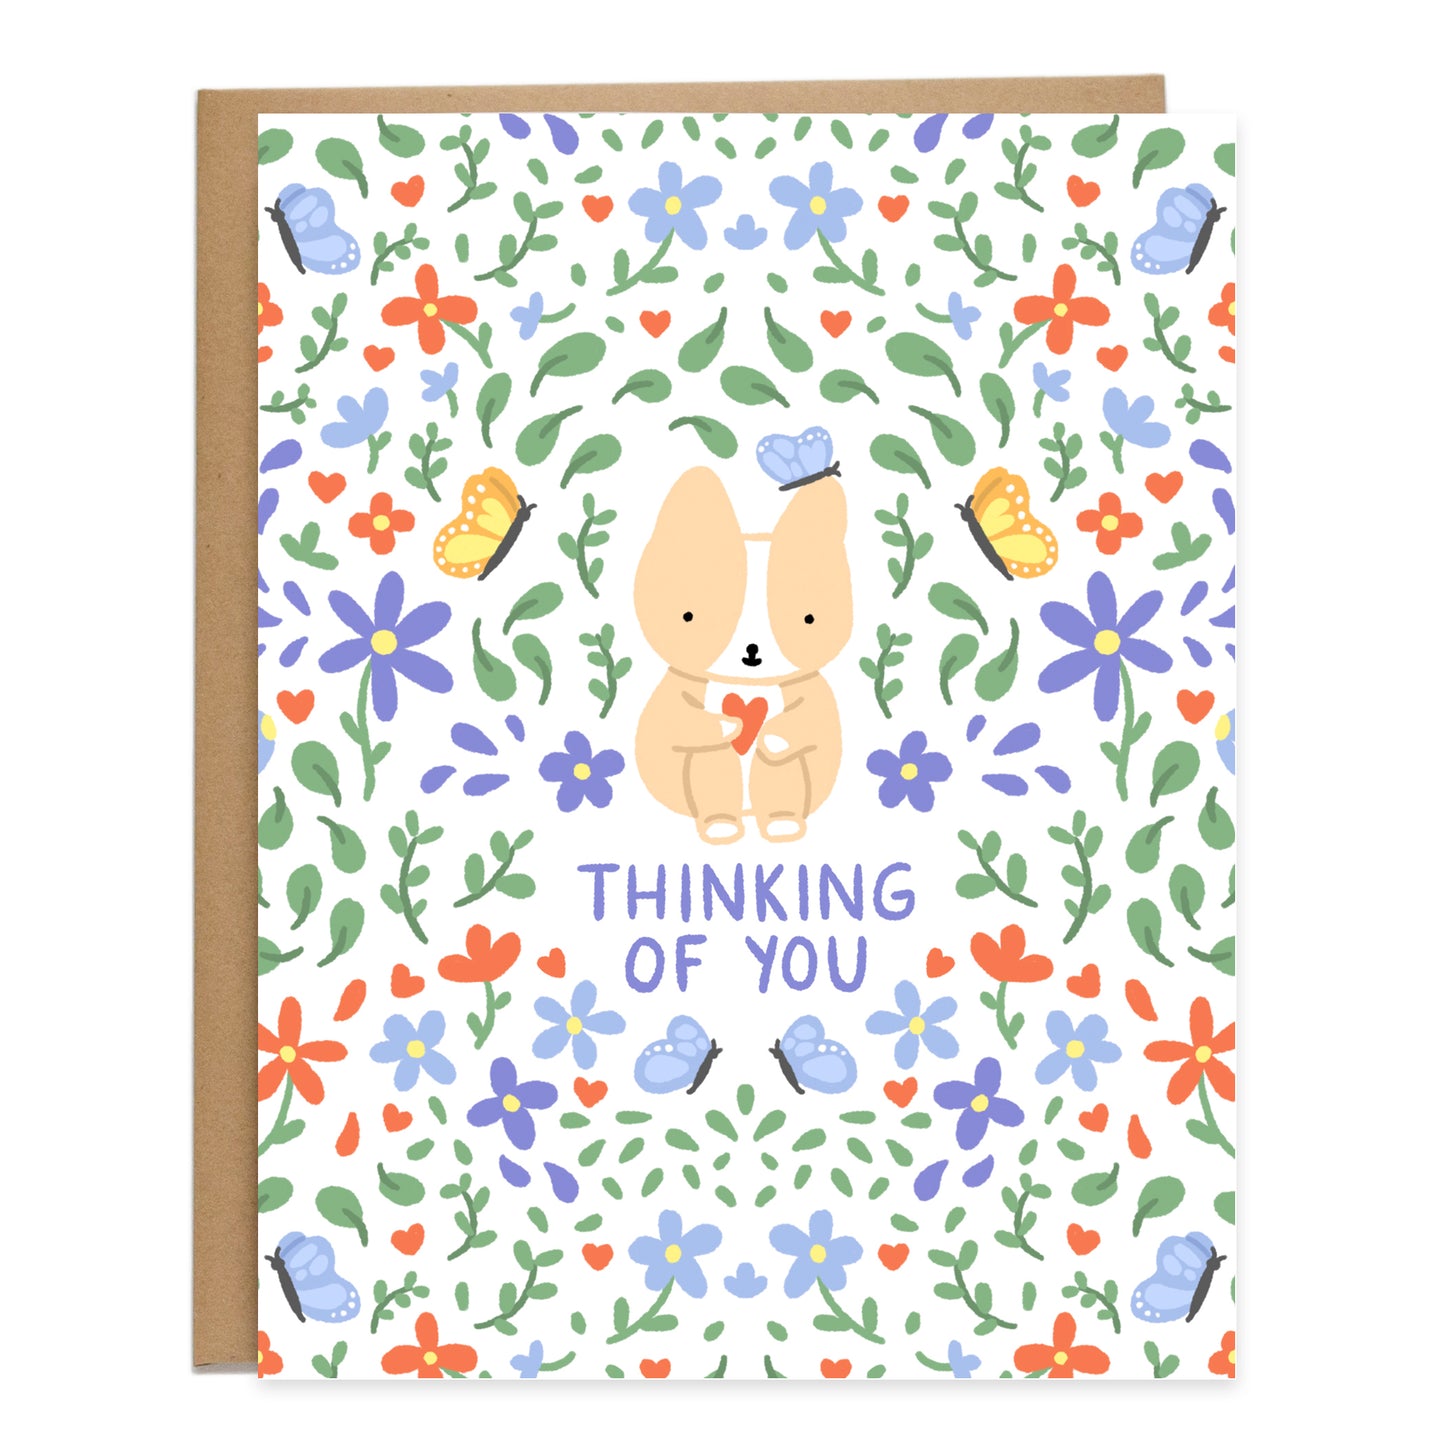 a drawing of a corgi sitting and holding its knees to their chest with a heart in their hand. a blue butterfly landed on it's ear. they are surrounded by a pattern of purple and blue flowers, leaves, yellow and blue butterflies